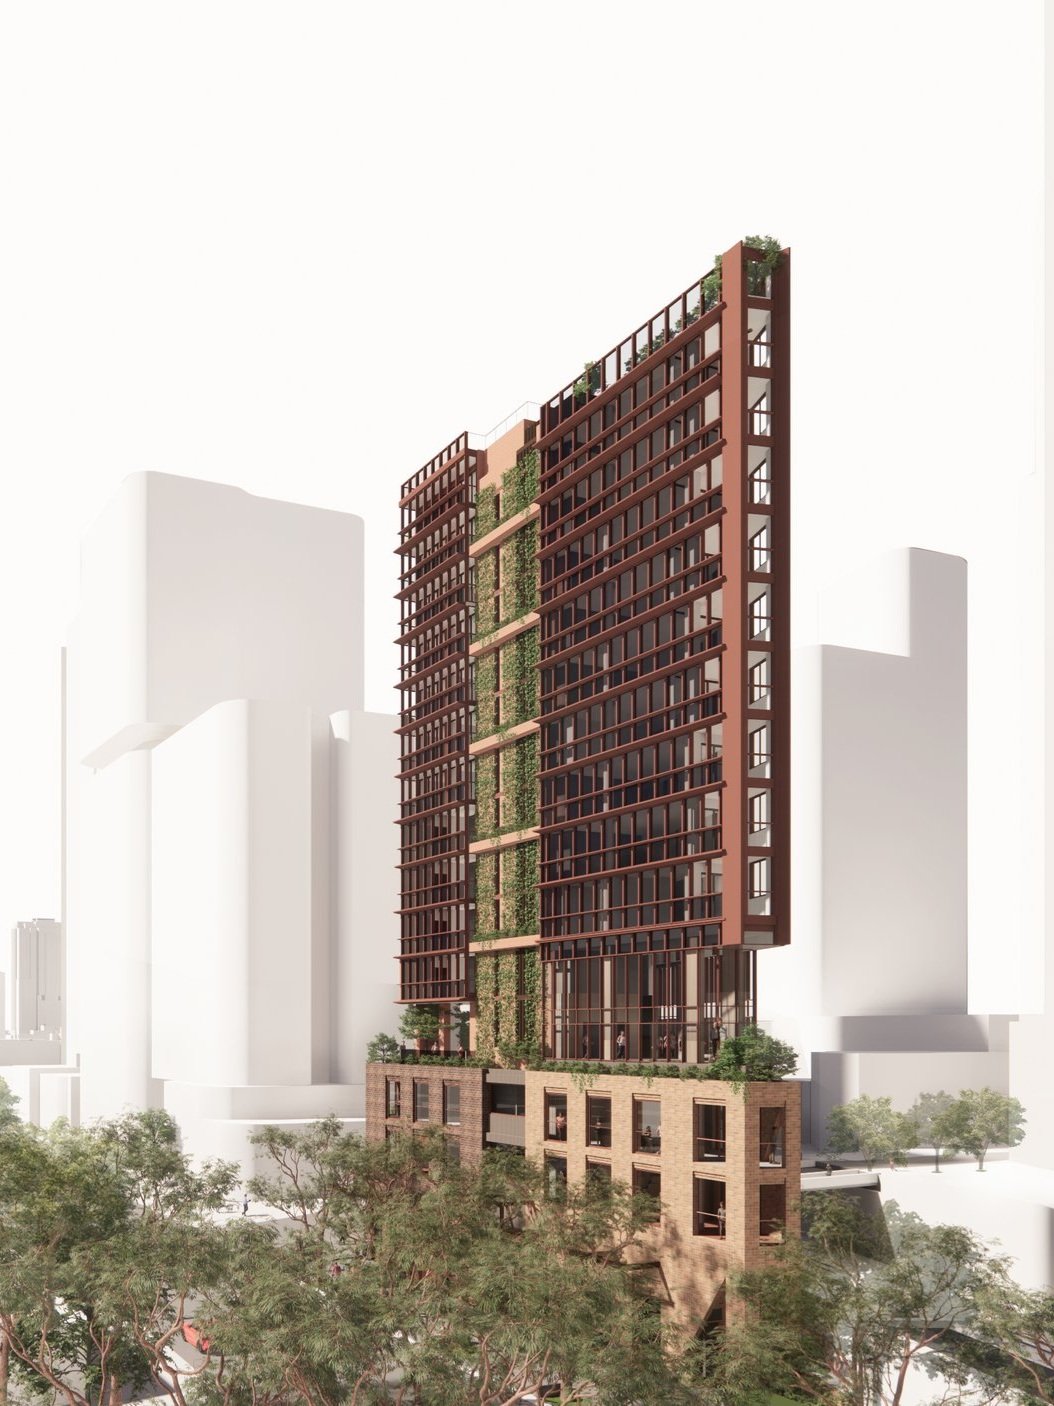 Willoughby City Council’s Winning Design for 58 Anderson Street, Chatswood NSW